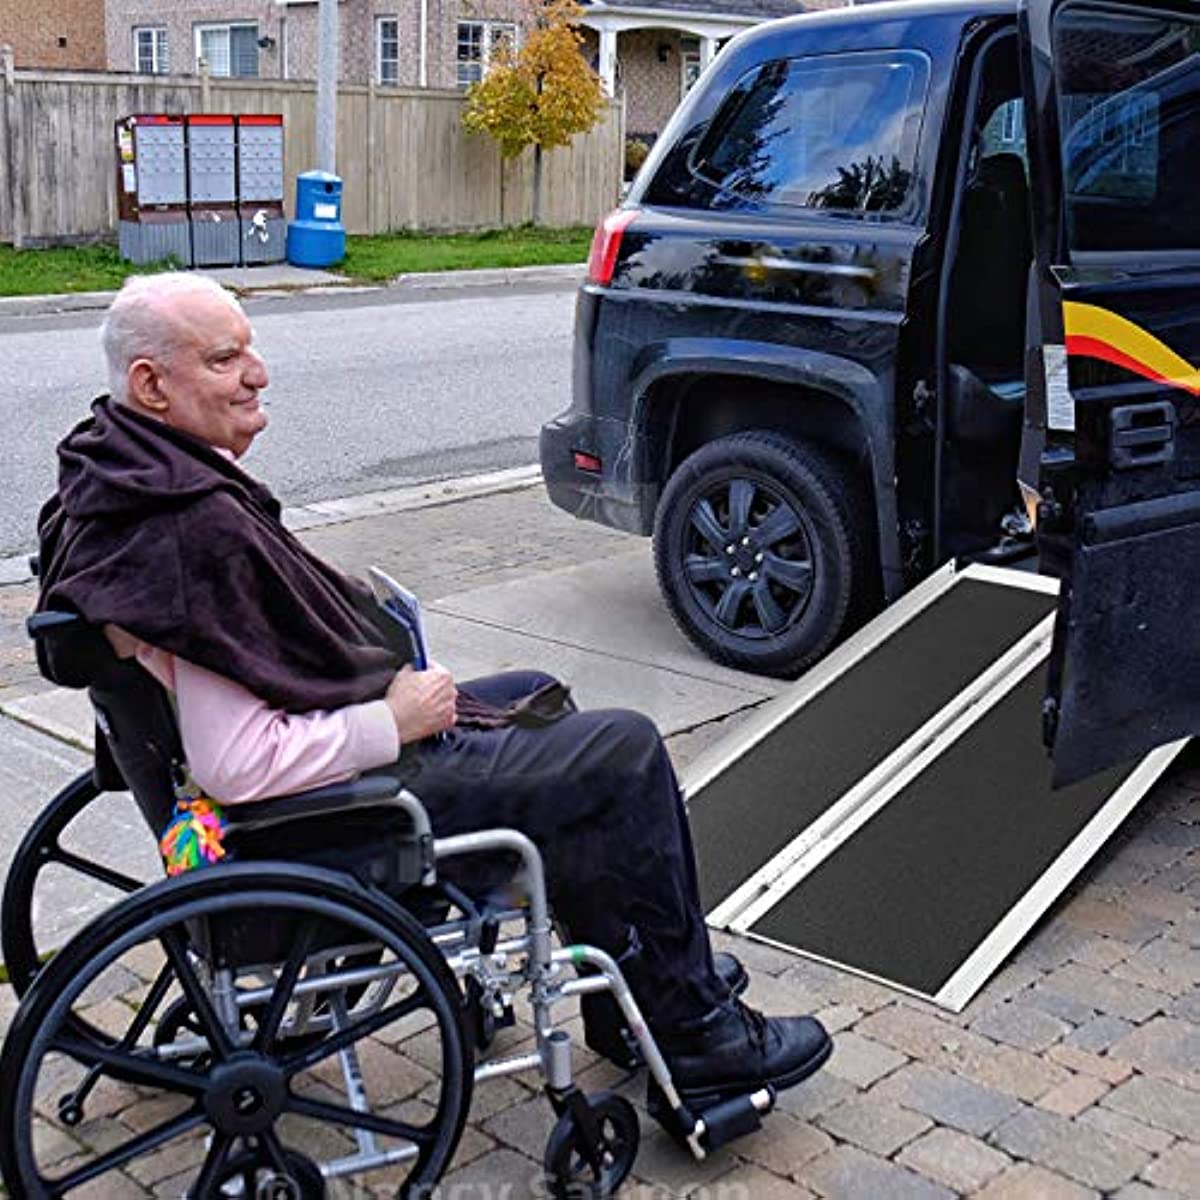 Koozam Upgraded Wheelchair Ramp | Strong, Sturdy Aluminum Portable Wheelchair Ramp with Skidproof Surface | Innovative Wide Threshold Ramp for Wheel Chairs, Scooters & More | 36 x 31 Inches